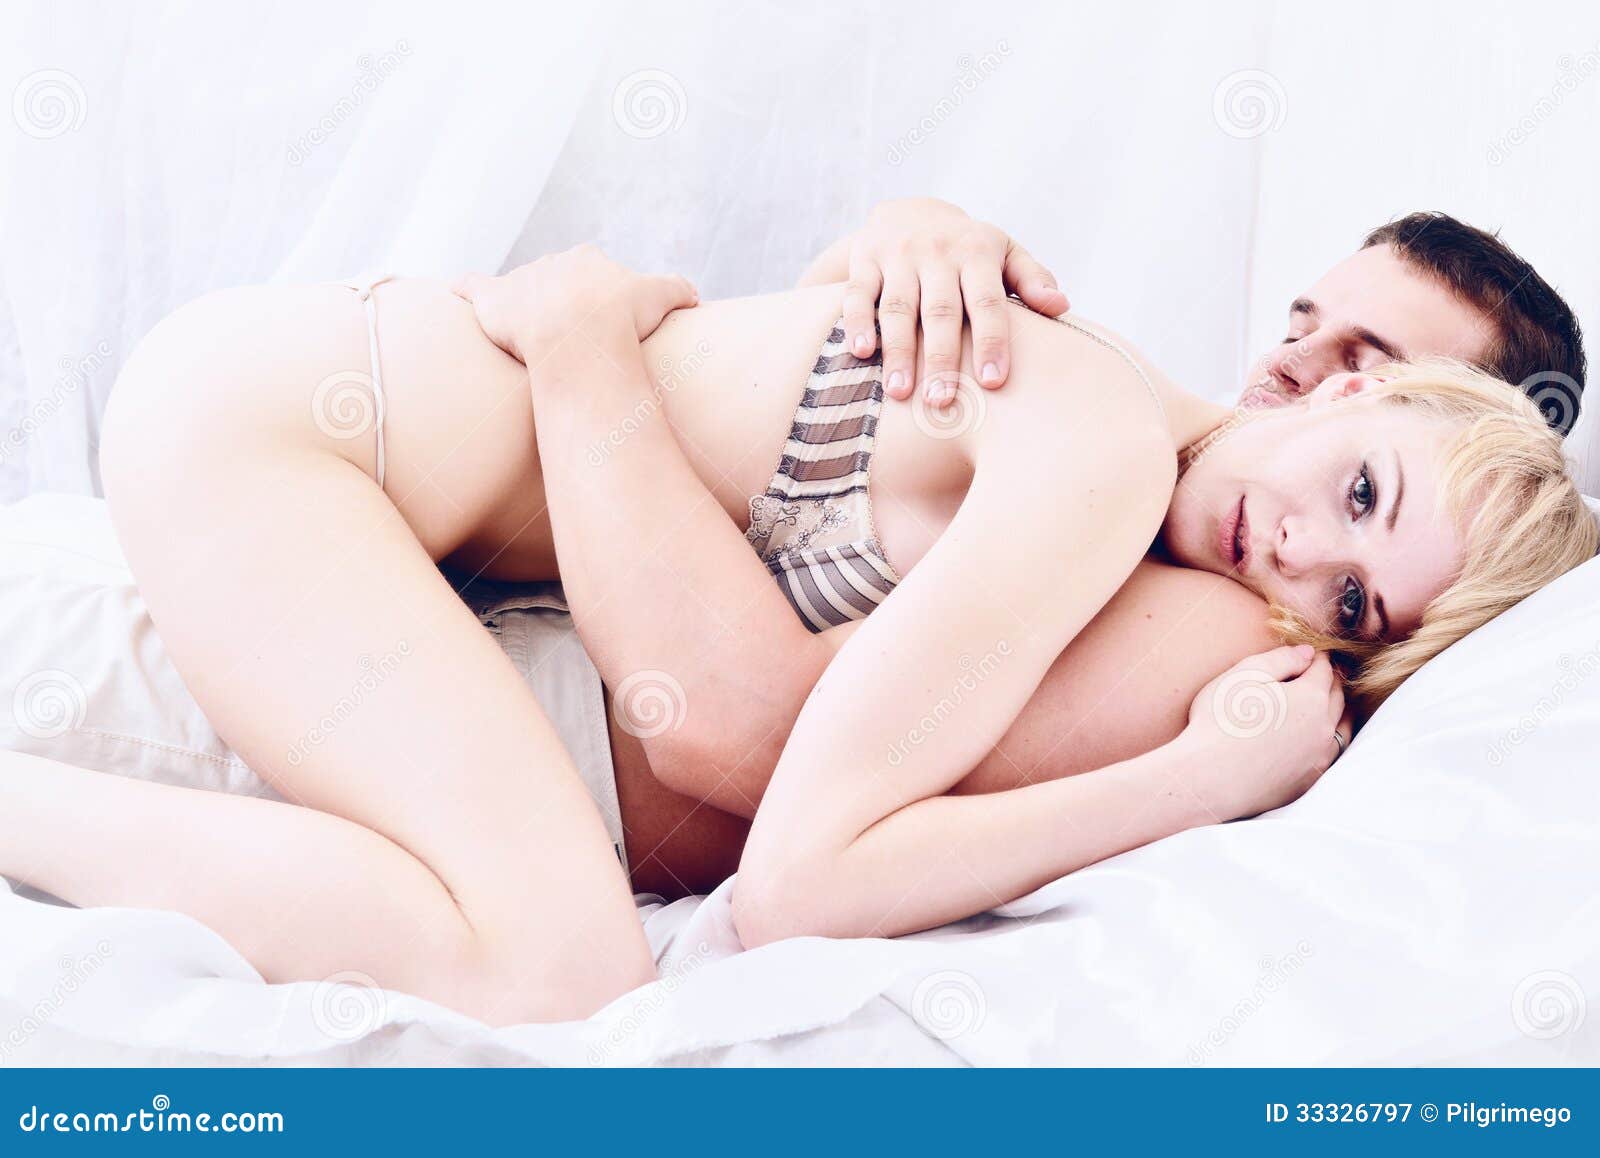 Couples making love naked Couple